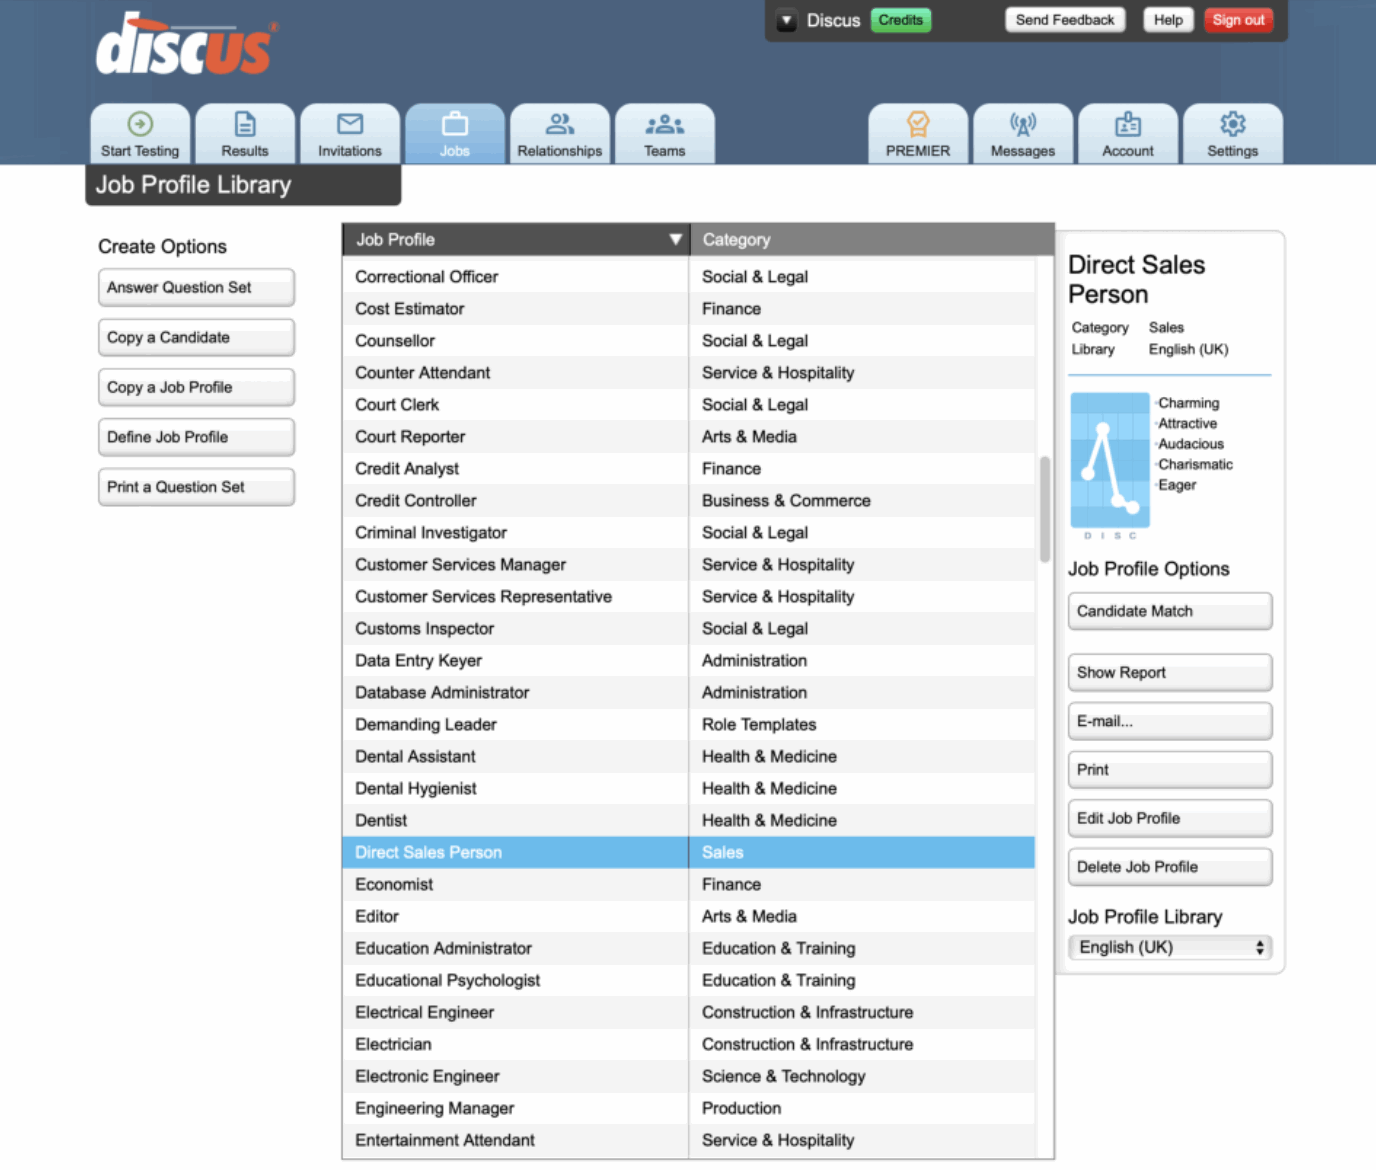 Screenshot showing the range of roles inside the Discus job profile library